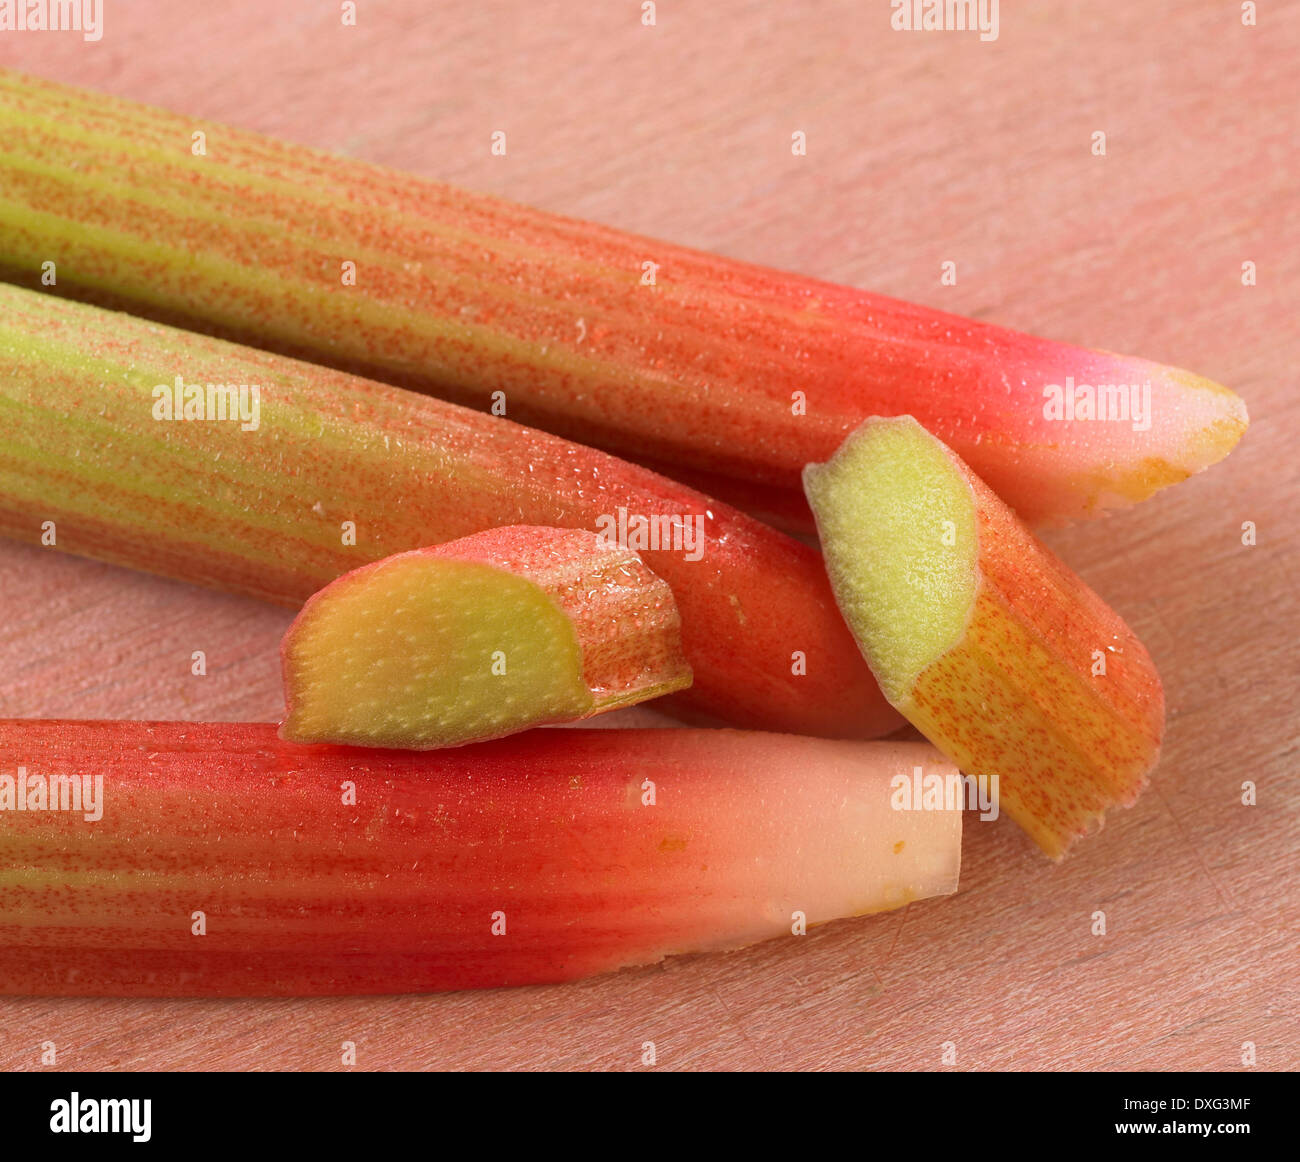 Sliced Stalks Of Rhubarb On Wooden Surface Stock Photo